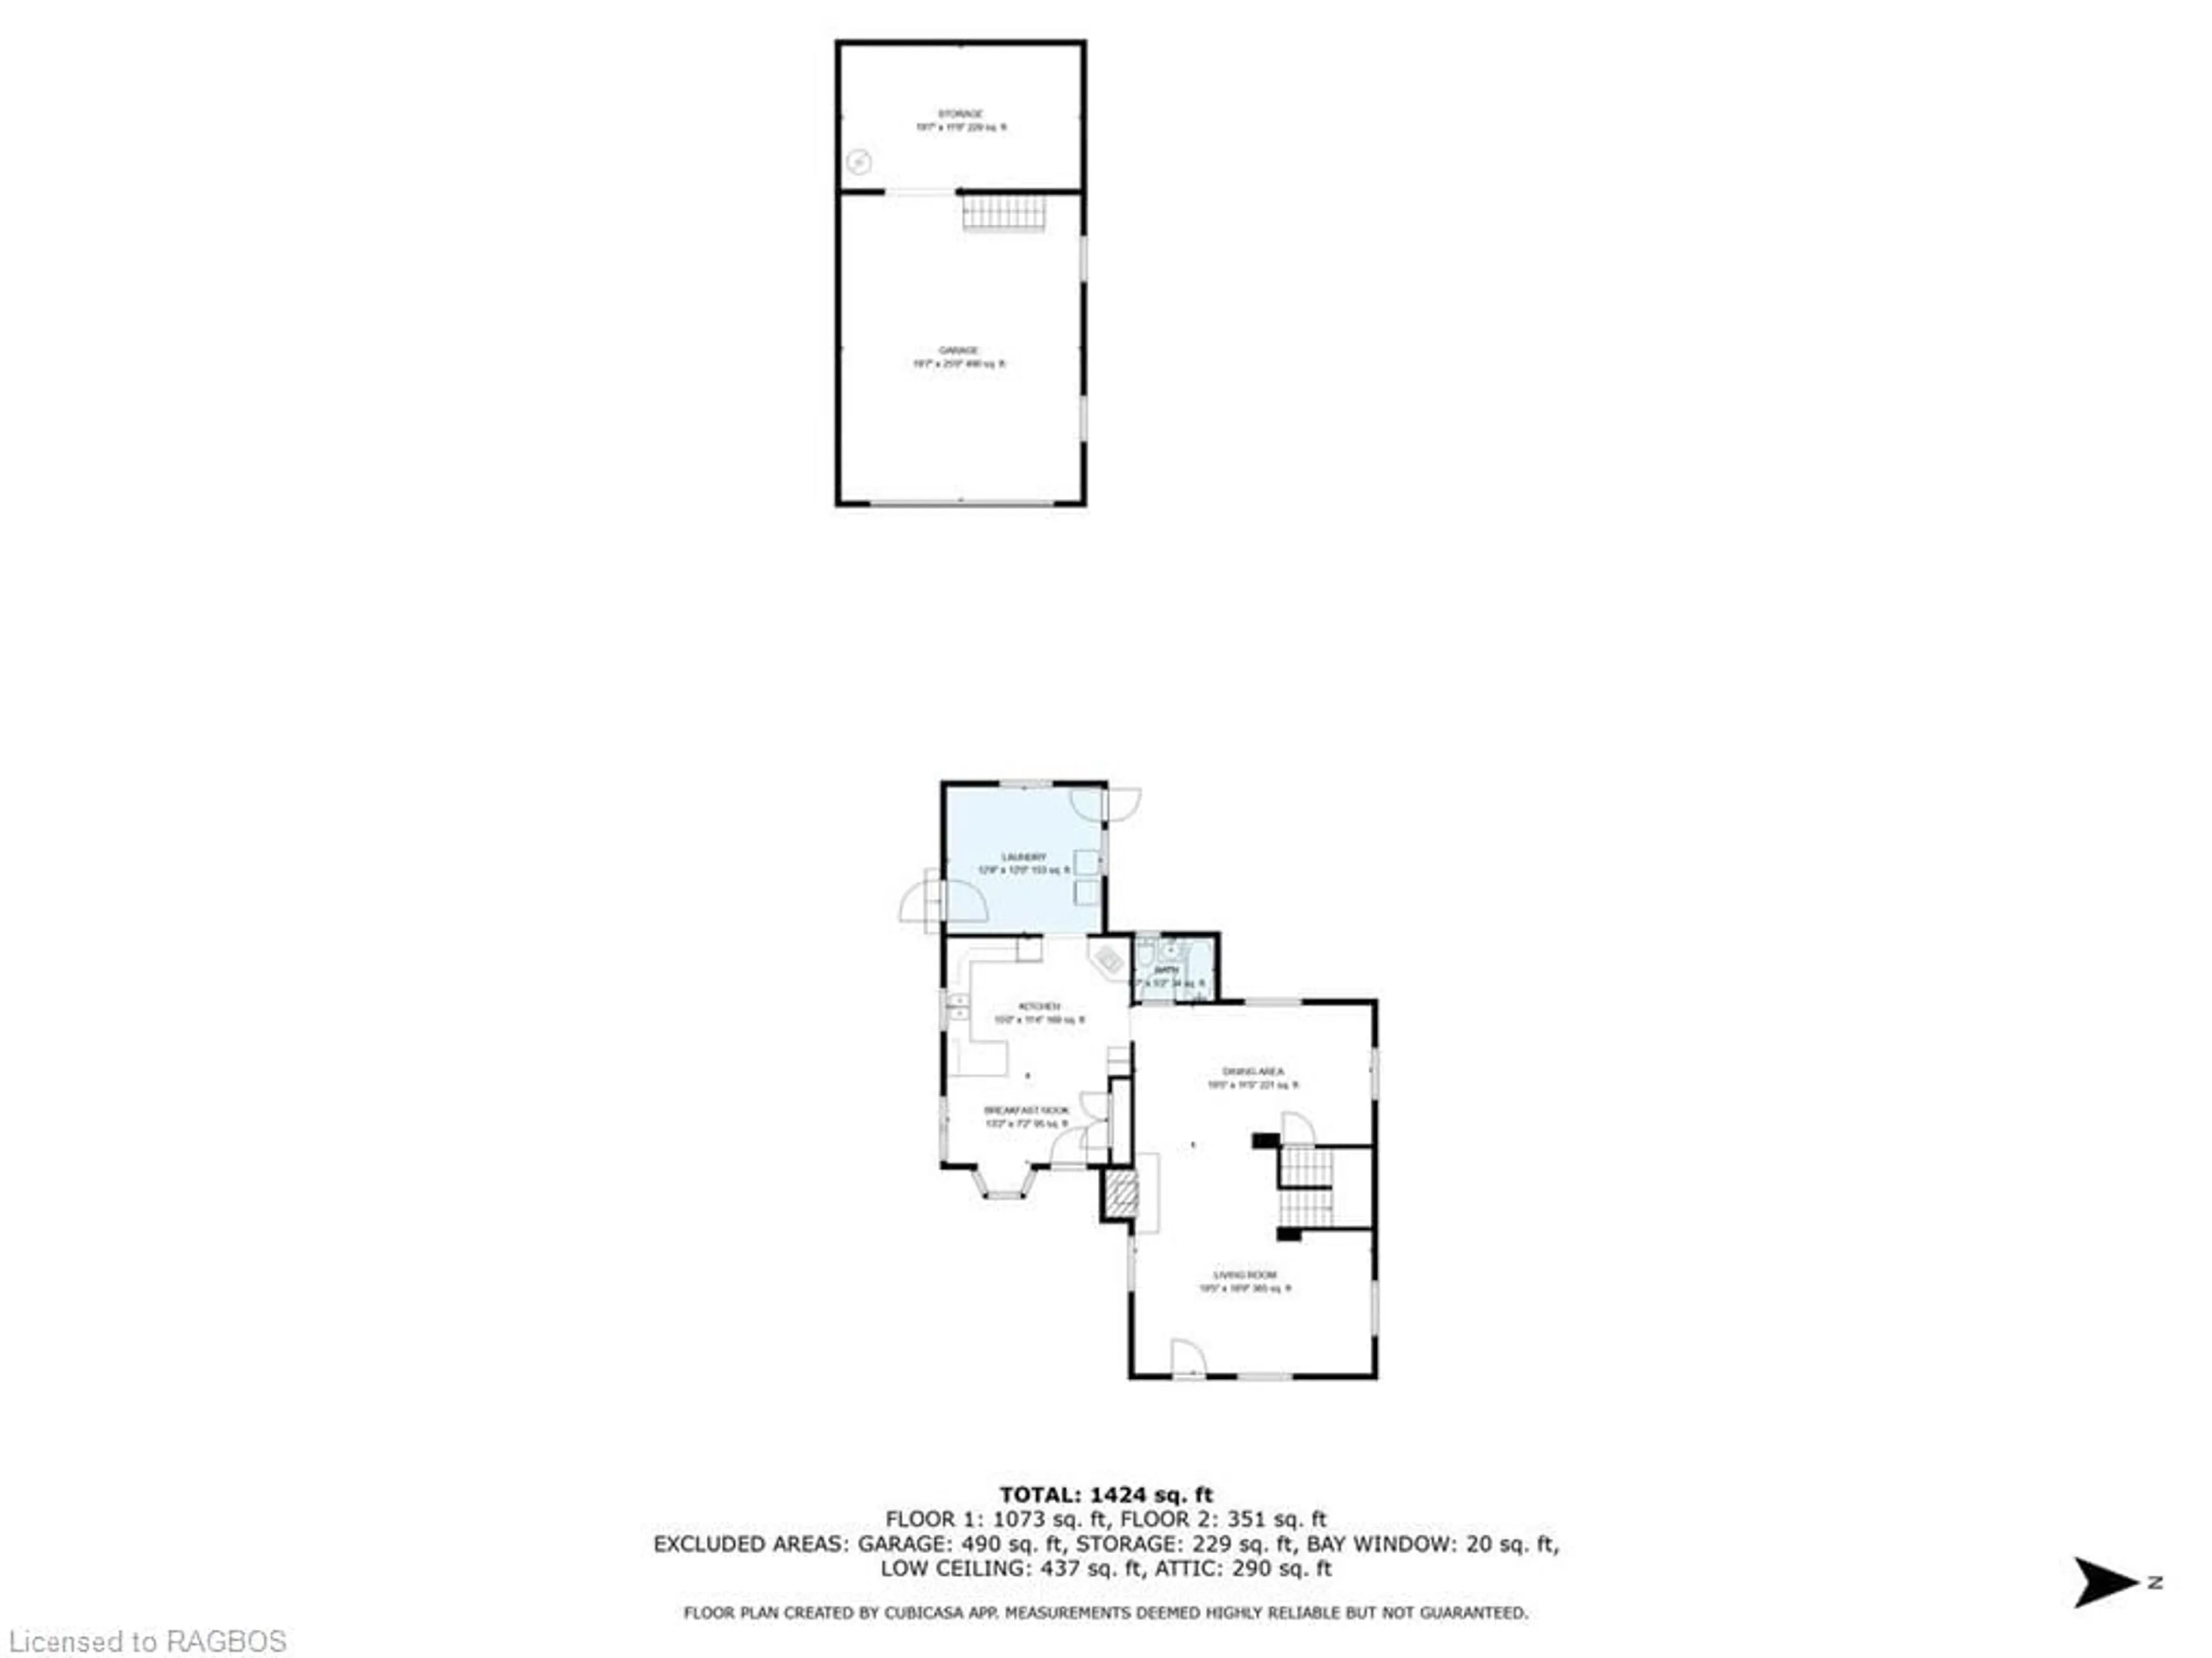 Floor plan for 570 Gould St, Wiarton Ontario N0H 2T0